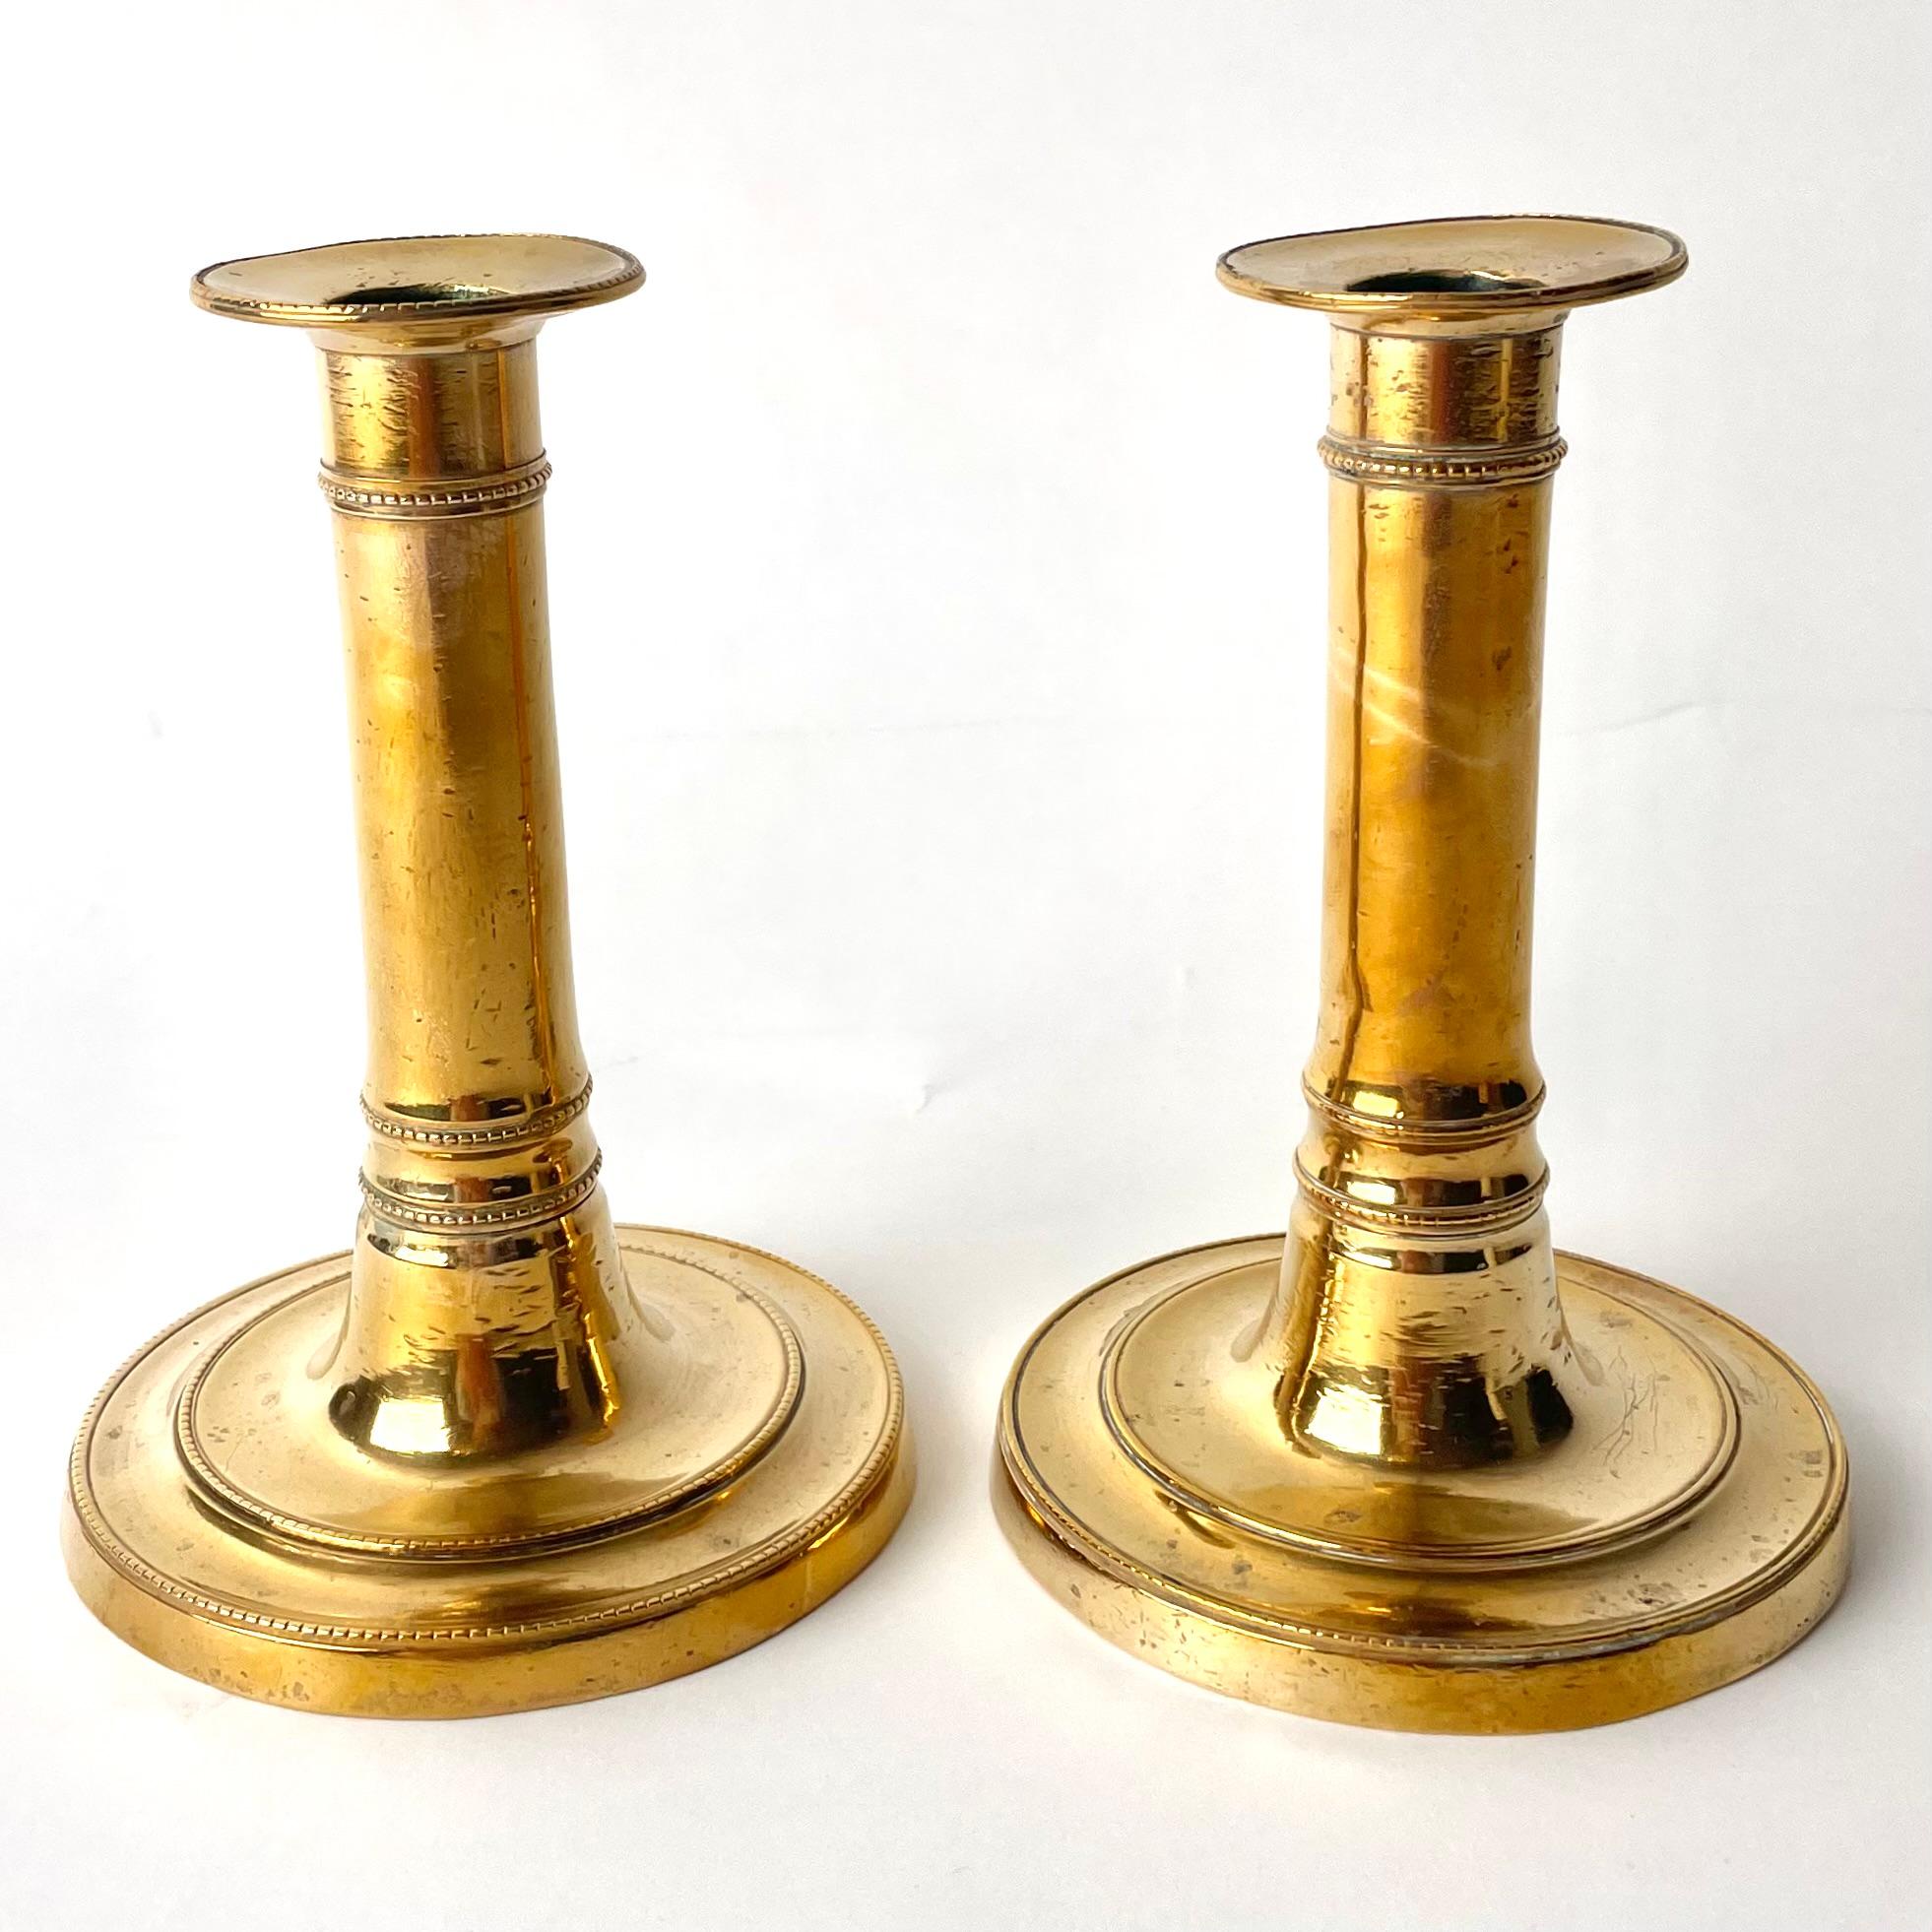 Gustavian Brass Candlesticks. Made in Sweden during the reign of Gustav III. 

The brass used in these candlesticks have high levels of copper, giving the candlesticks a warm golden glow. The ornamentation is typical of Gustavian pieces, reflecting